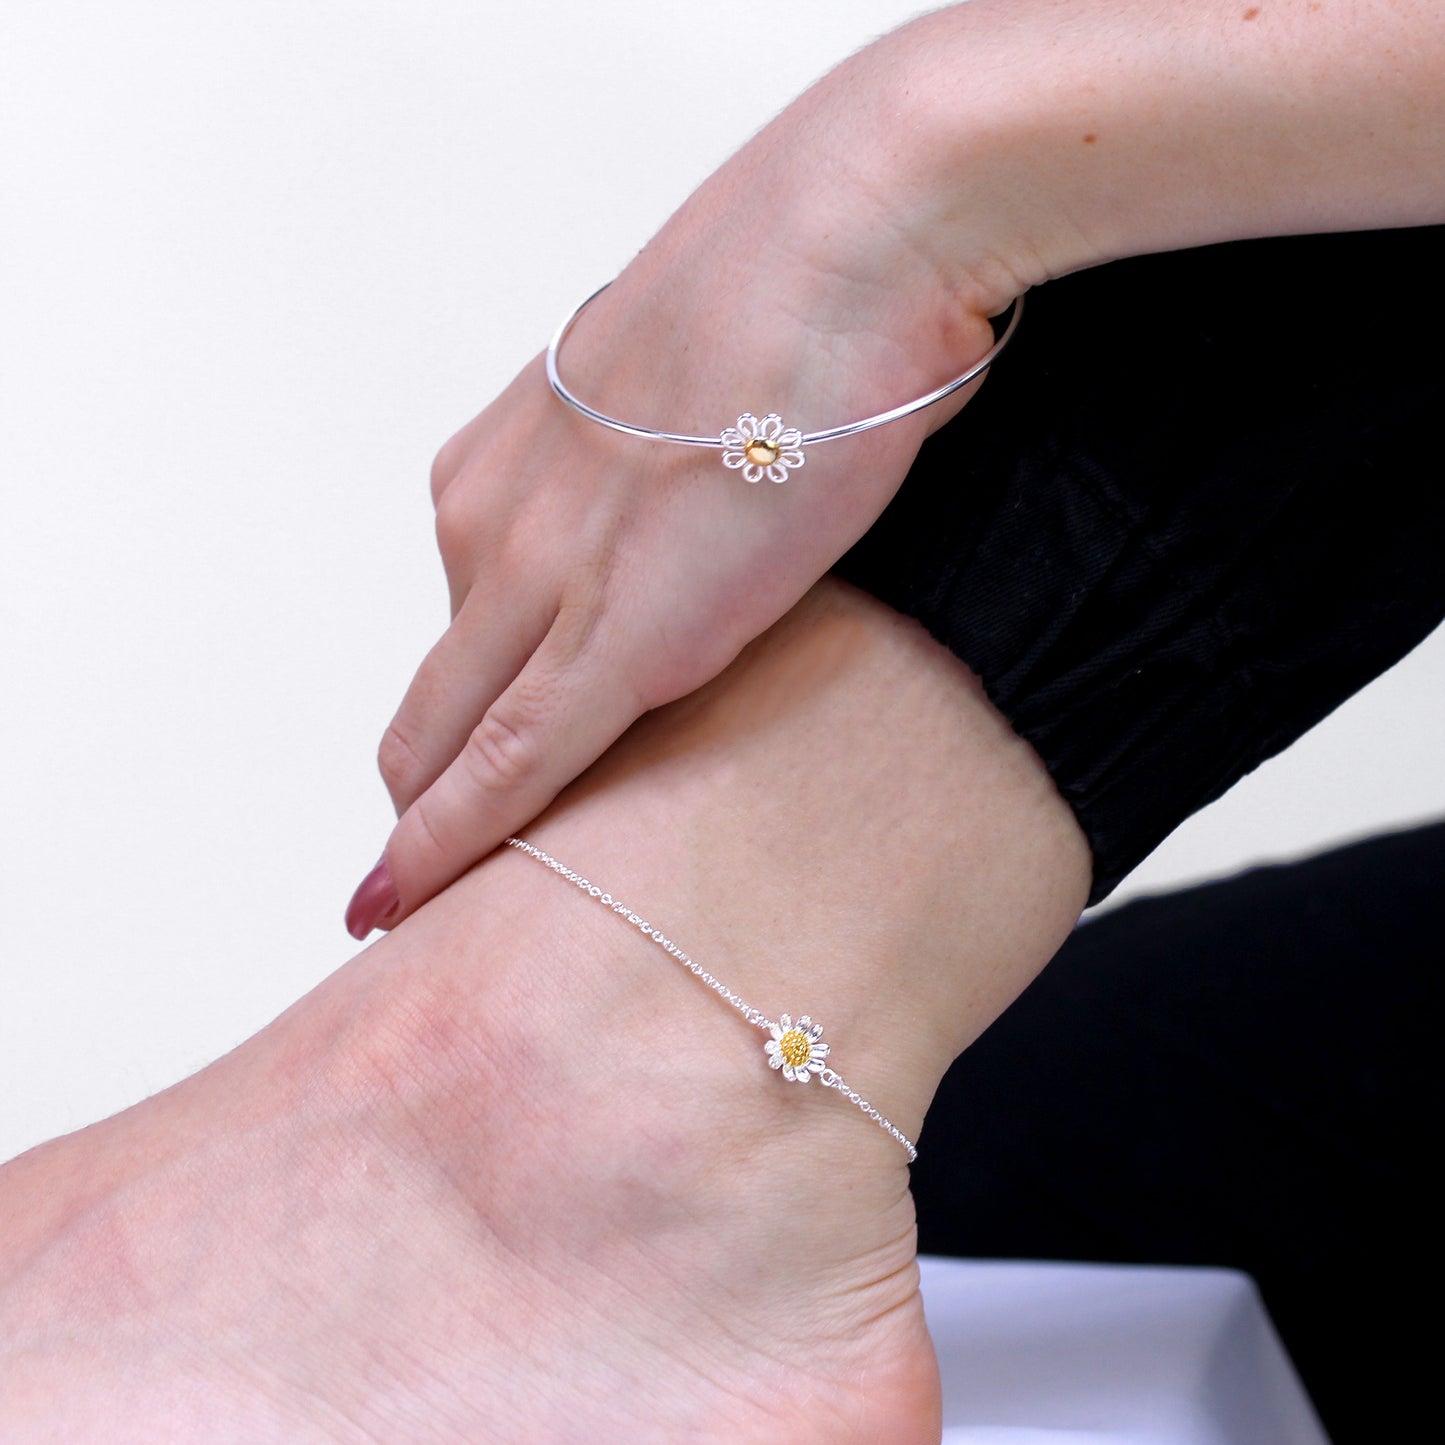 Sterling Silver Daisy Anklet